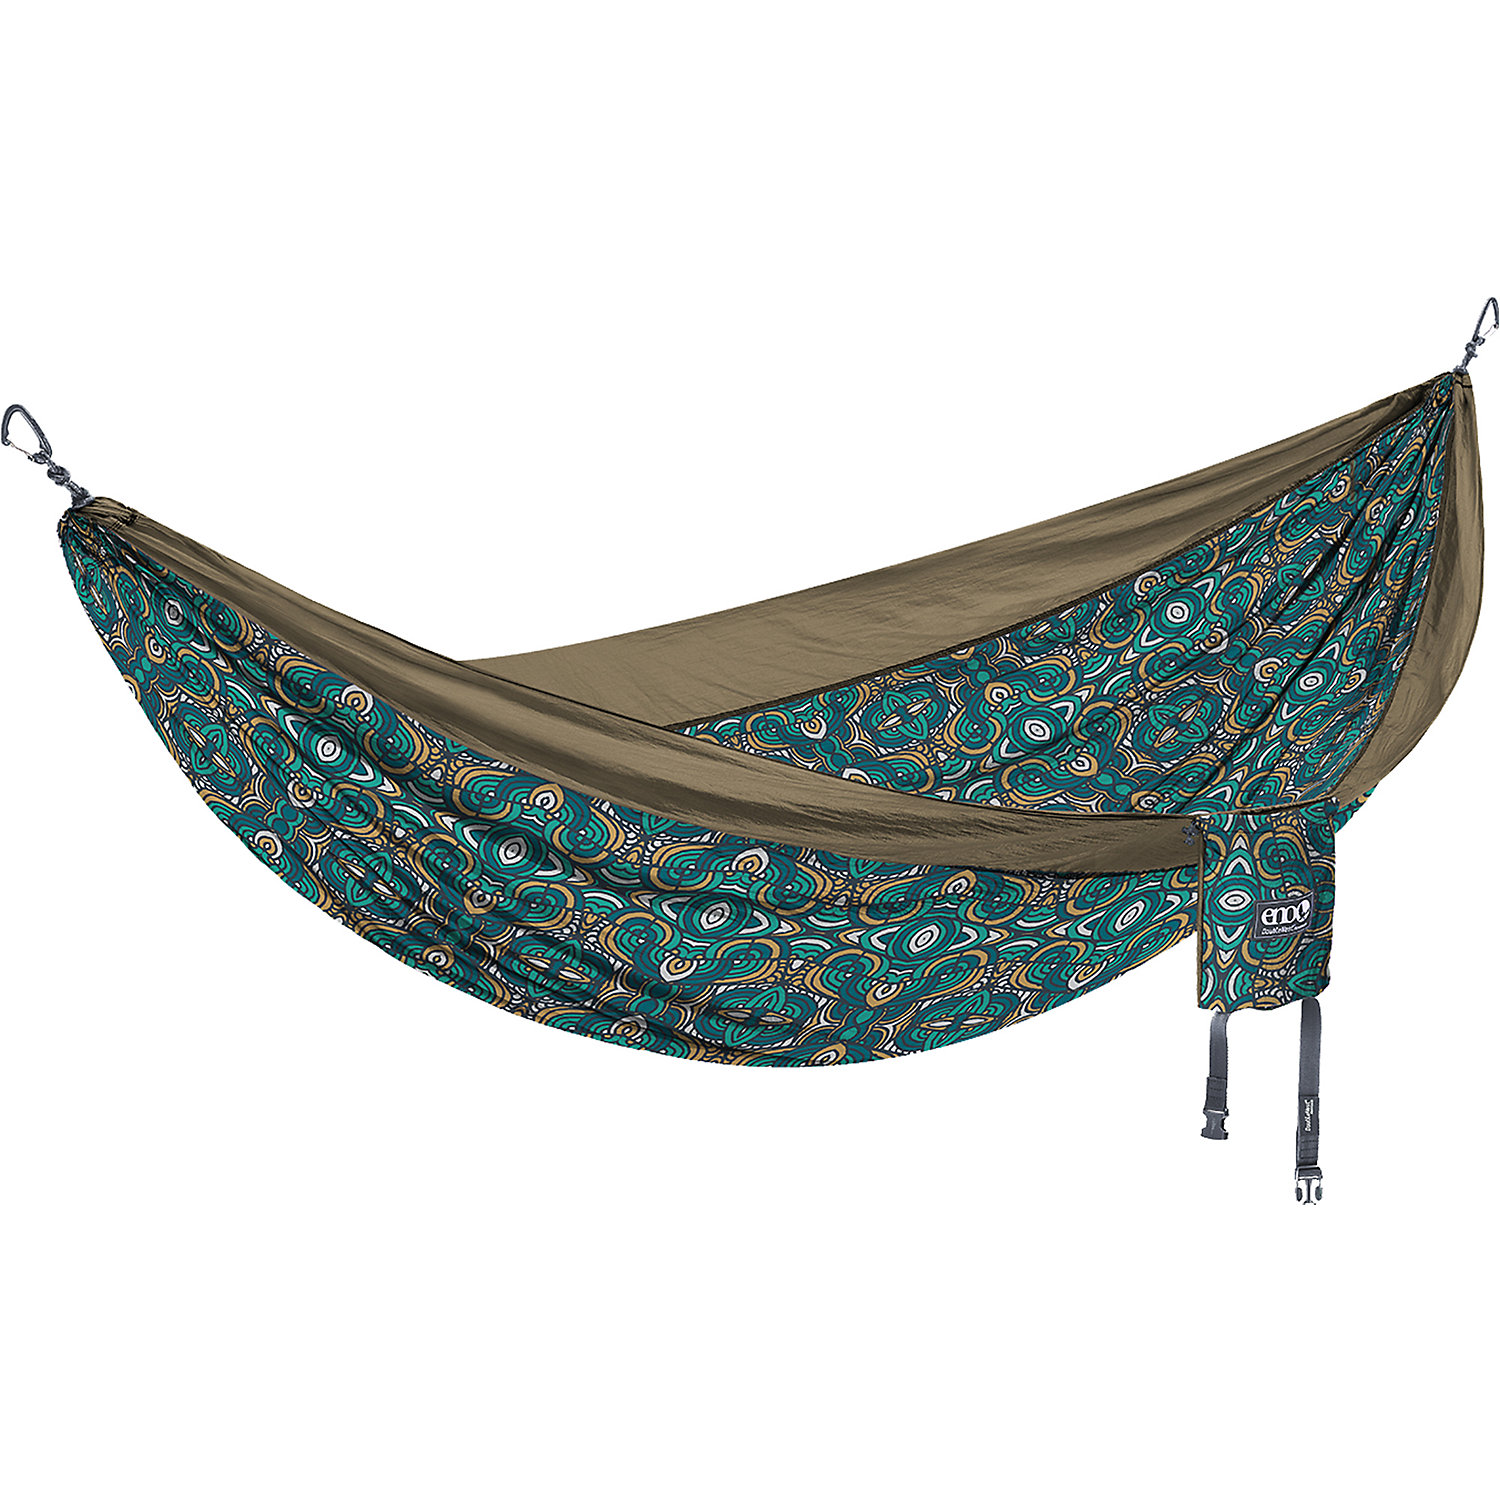 Eagles Nest Outfitters DoubleNest Hammock Print - Giving Back